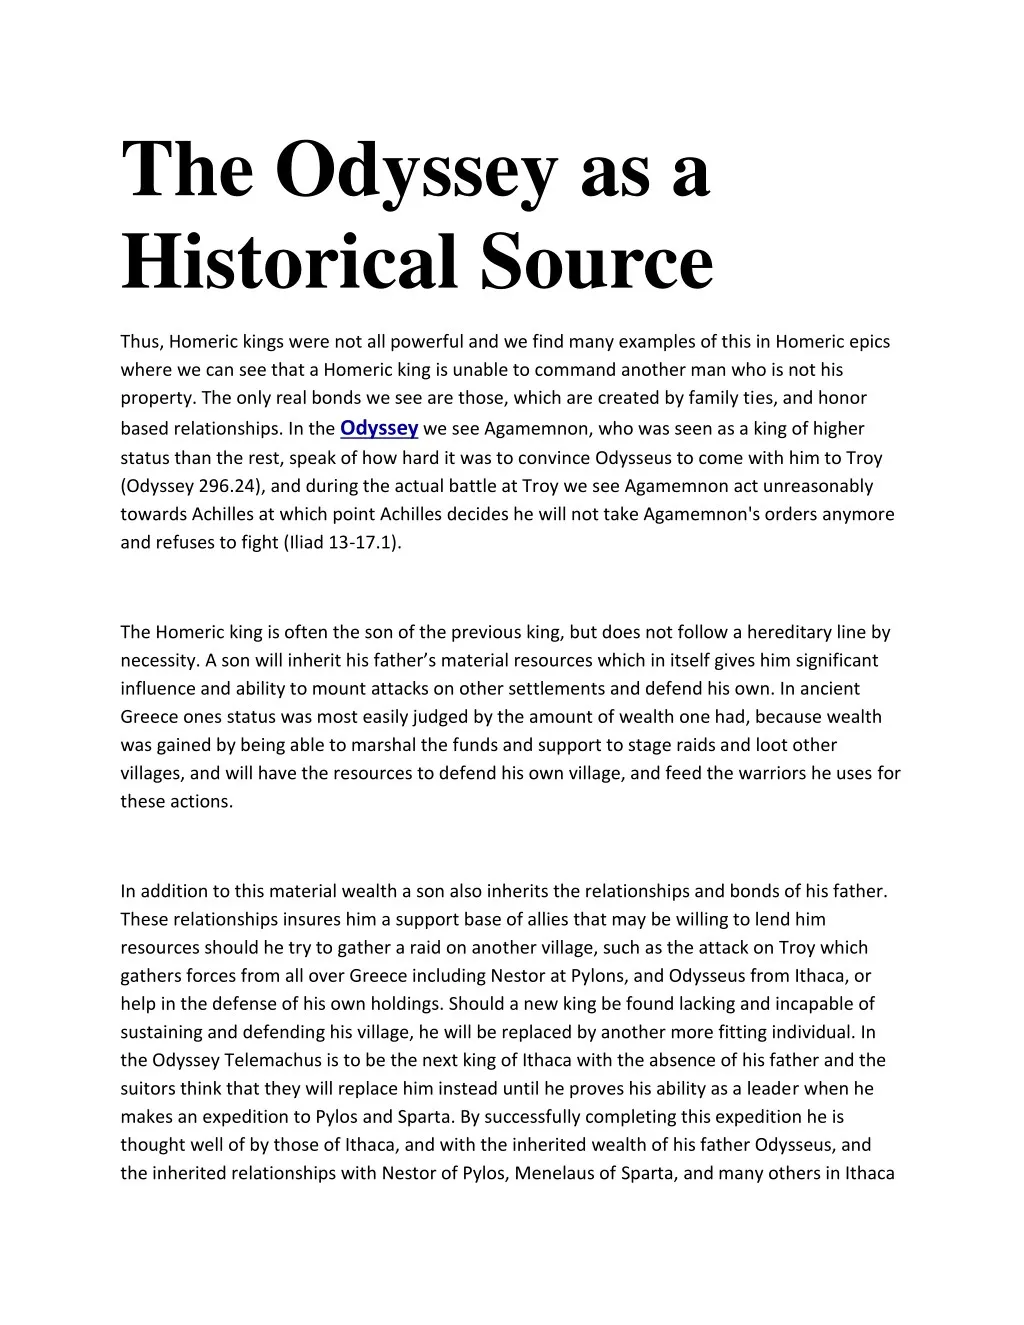 the odyssey as a historical source